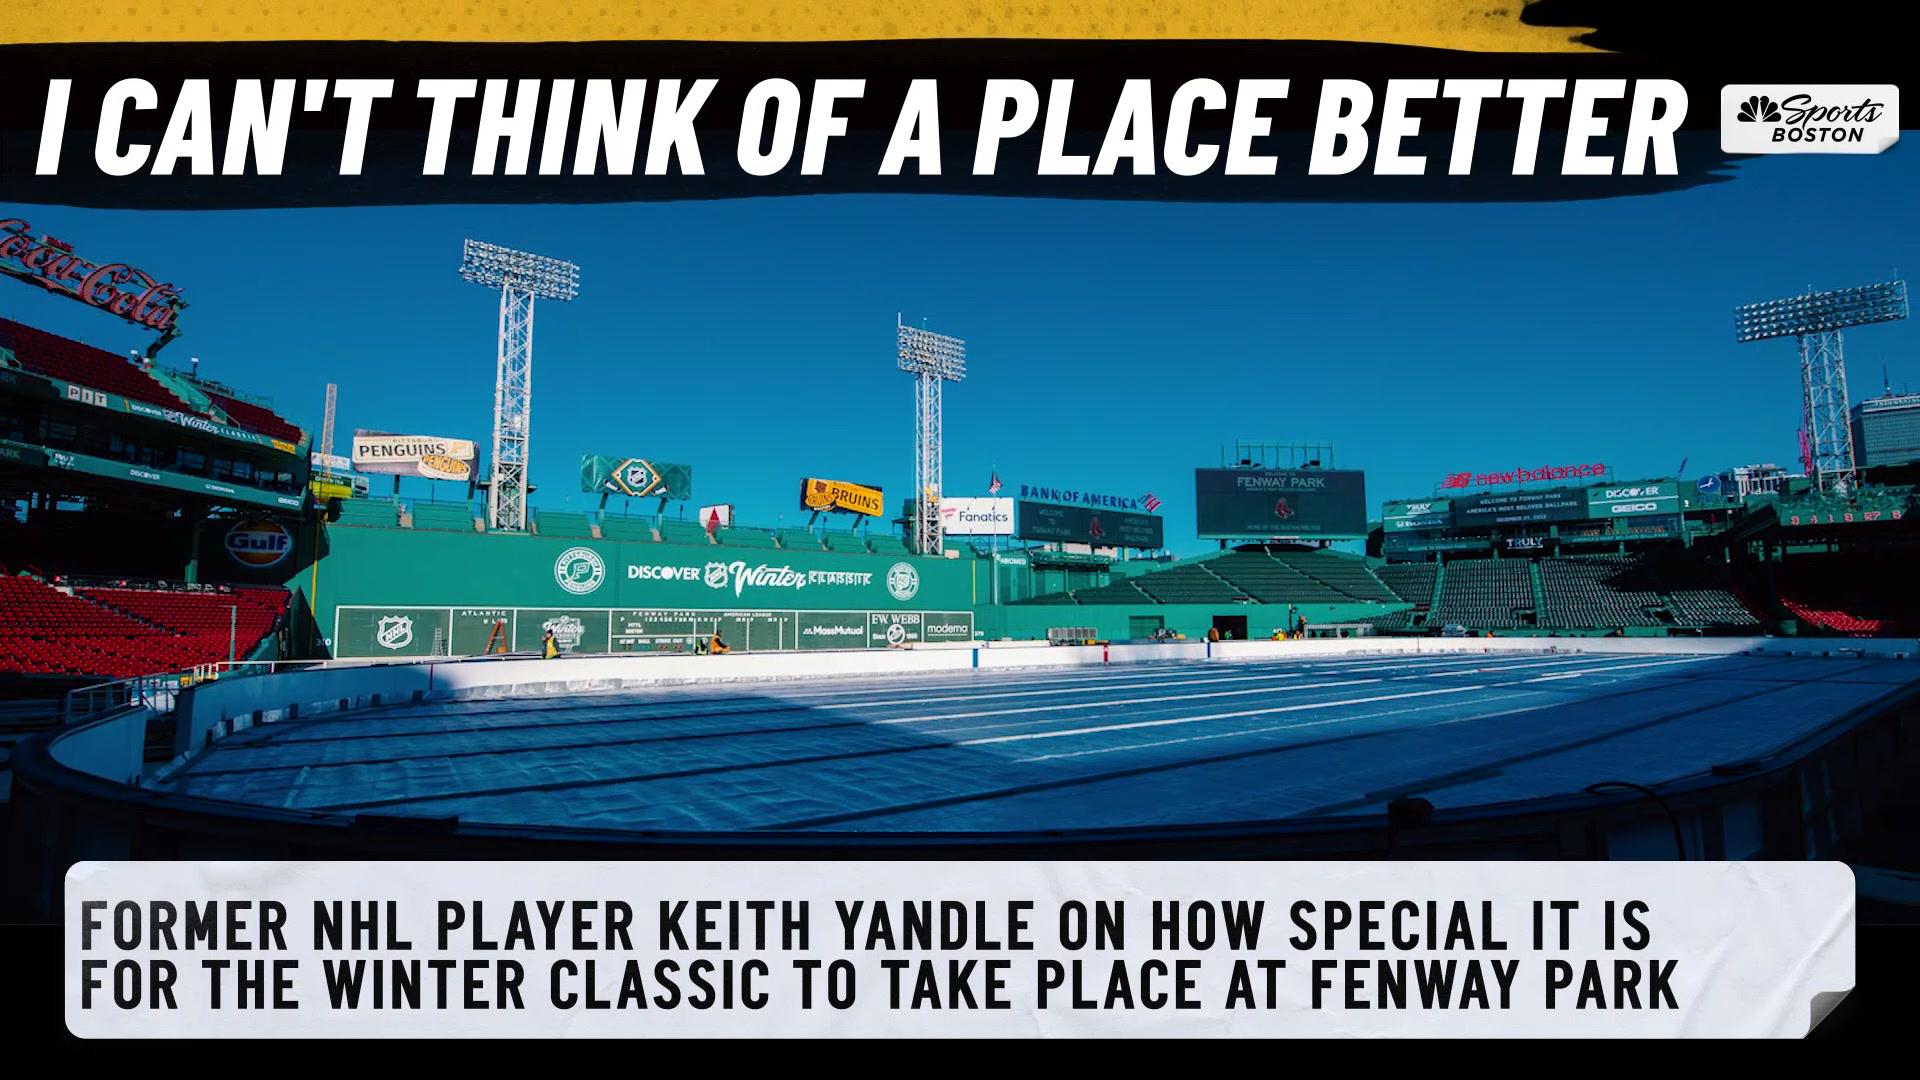 Fenway regulars: how do you deal with the place? - NBC Sports